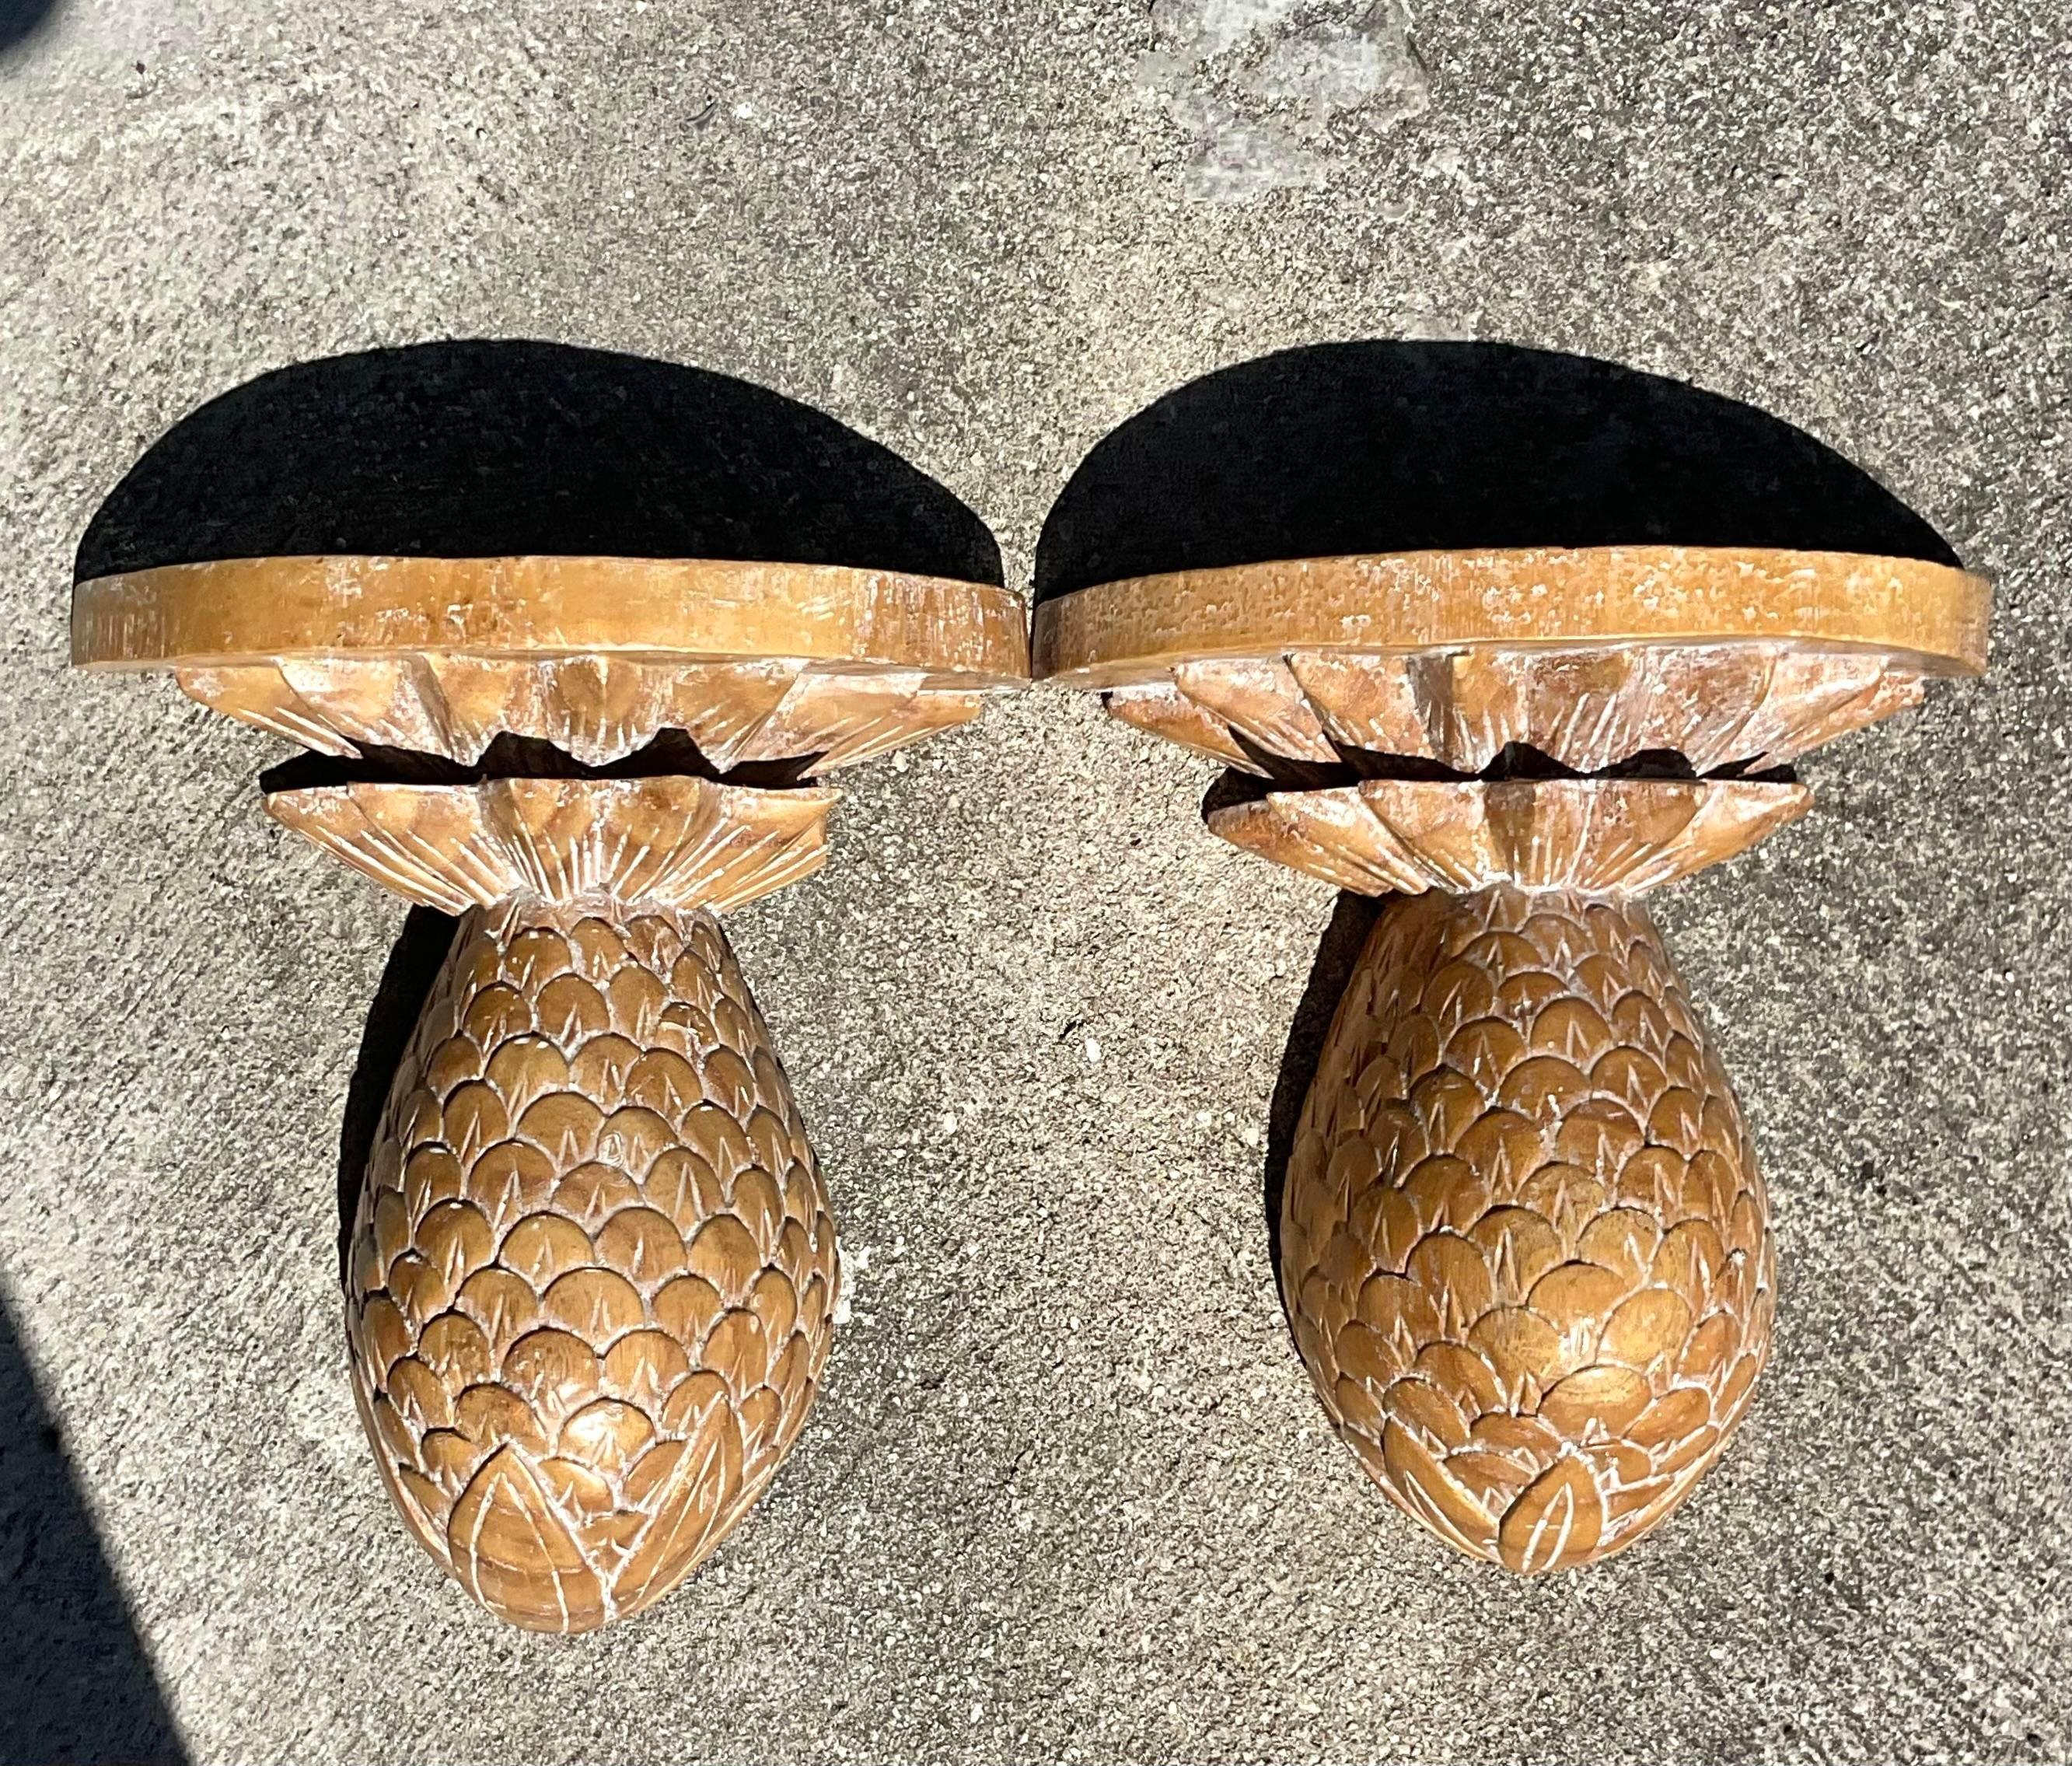 20th Century Vintage Regency Washed Wood Pineapple Brackets - a Pair For Sale